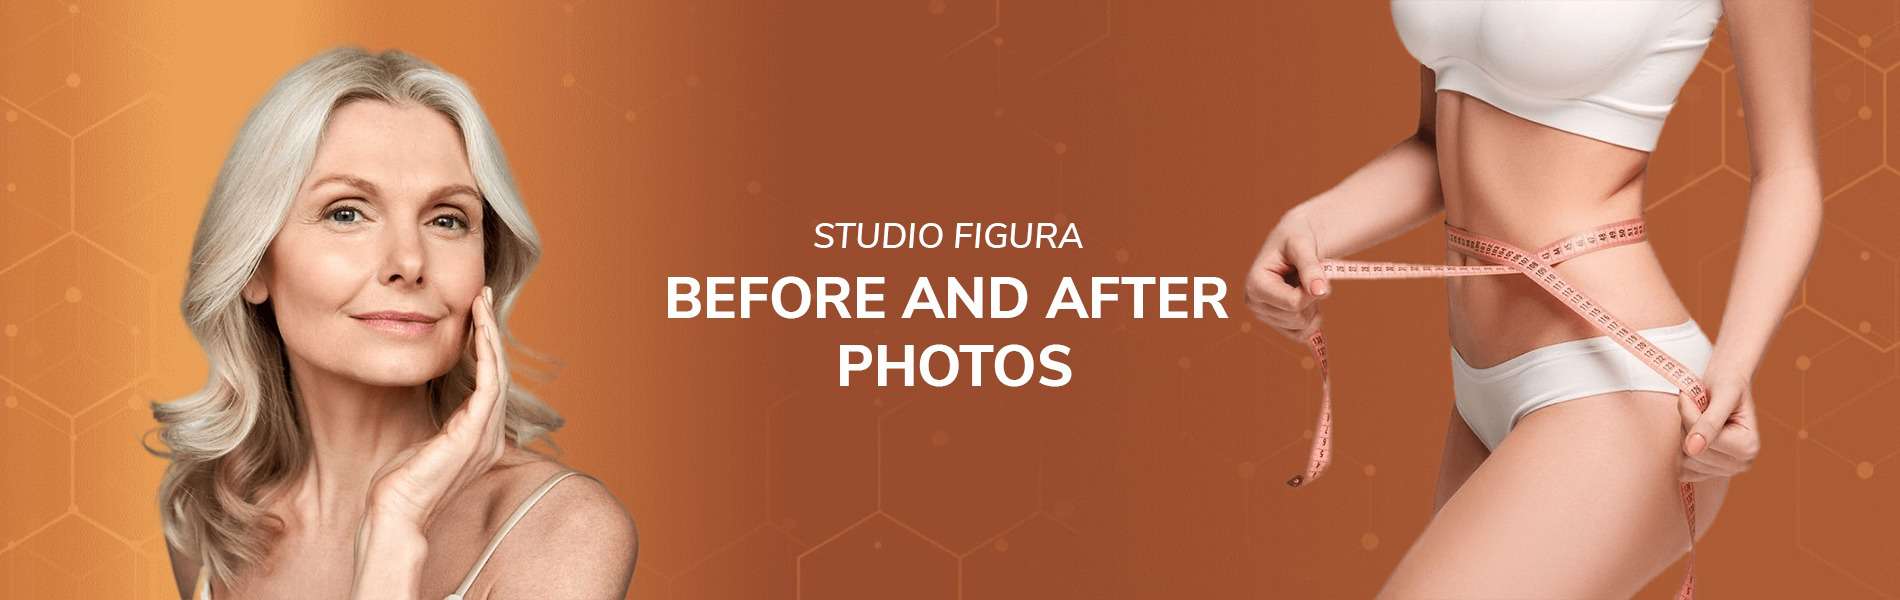 before and after - Studio Figura au - Book Now - 3